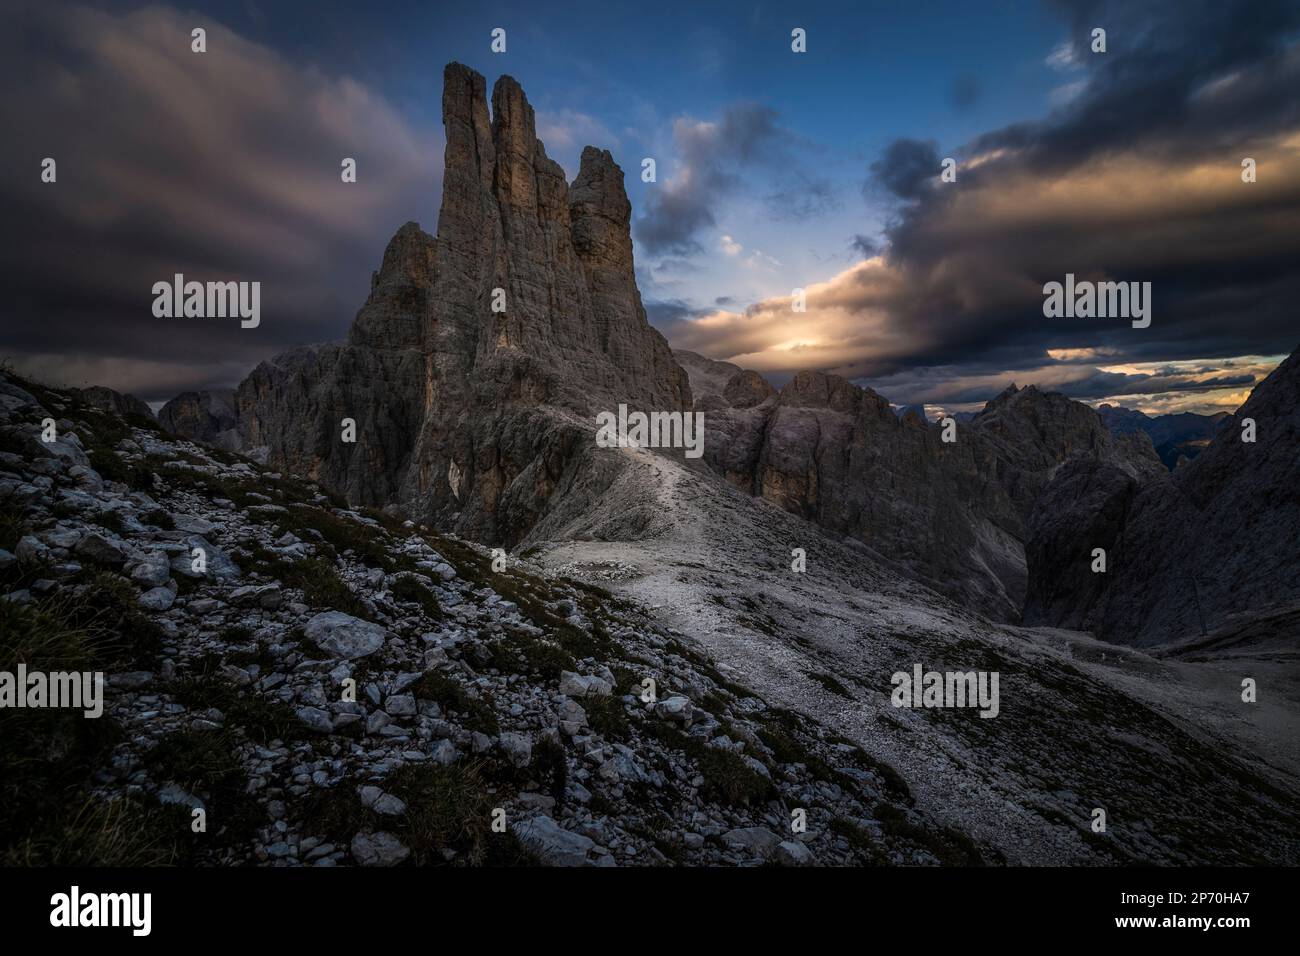 Picture of the Torri del Vajolet mountain range in Trentino, Italy at sunset over a cloudy sky Stock Photo